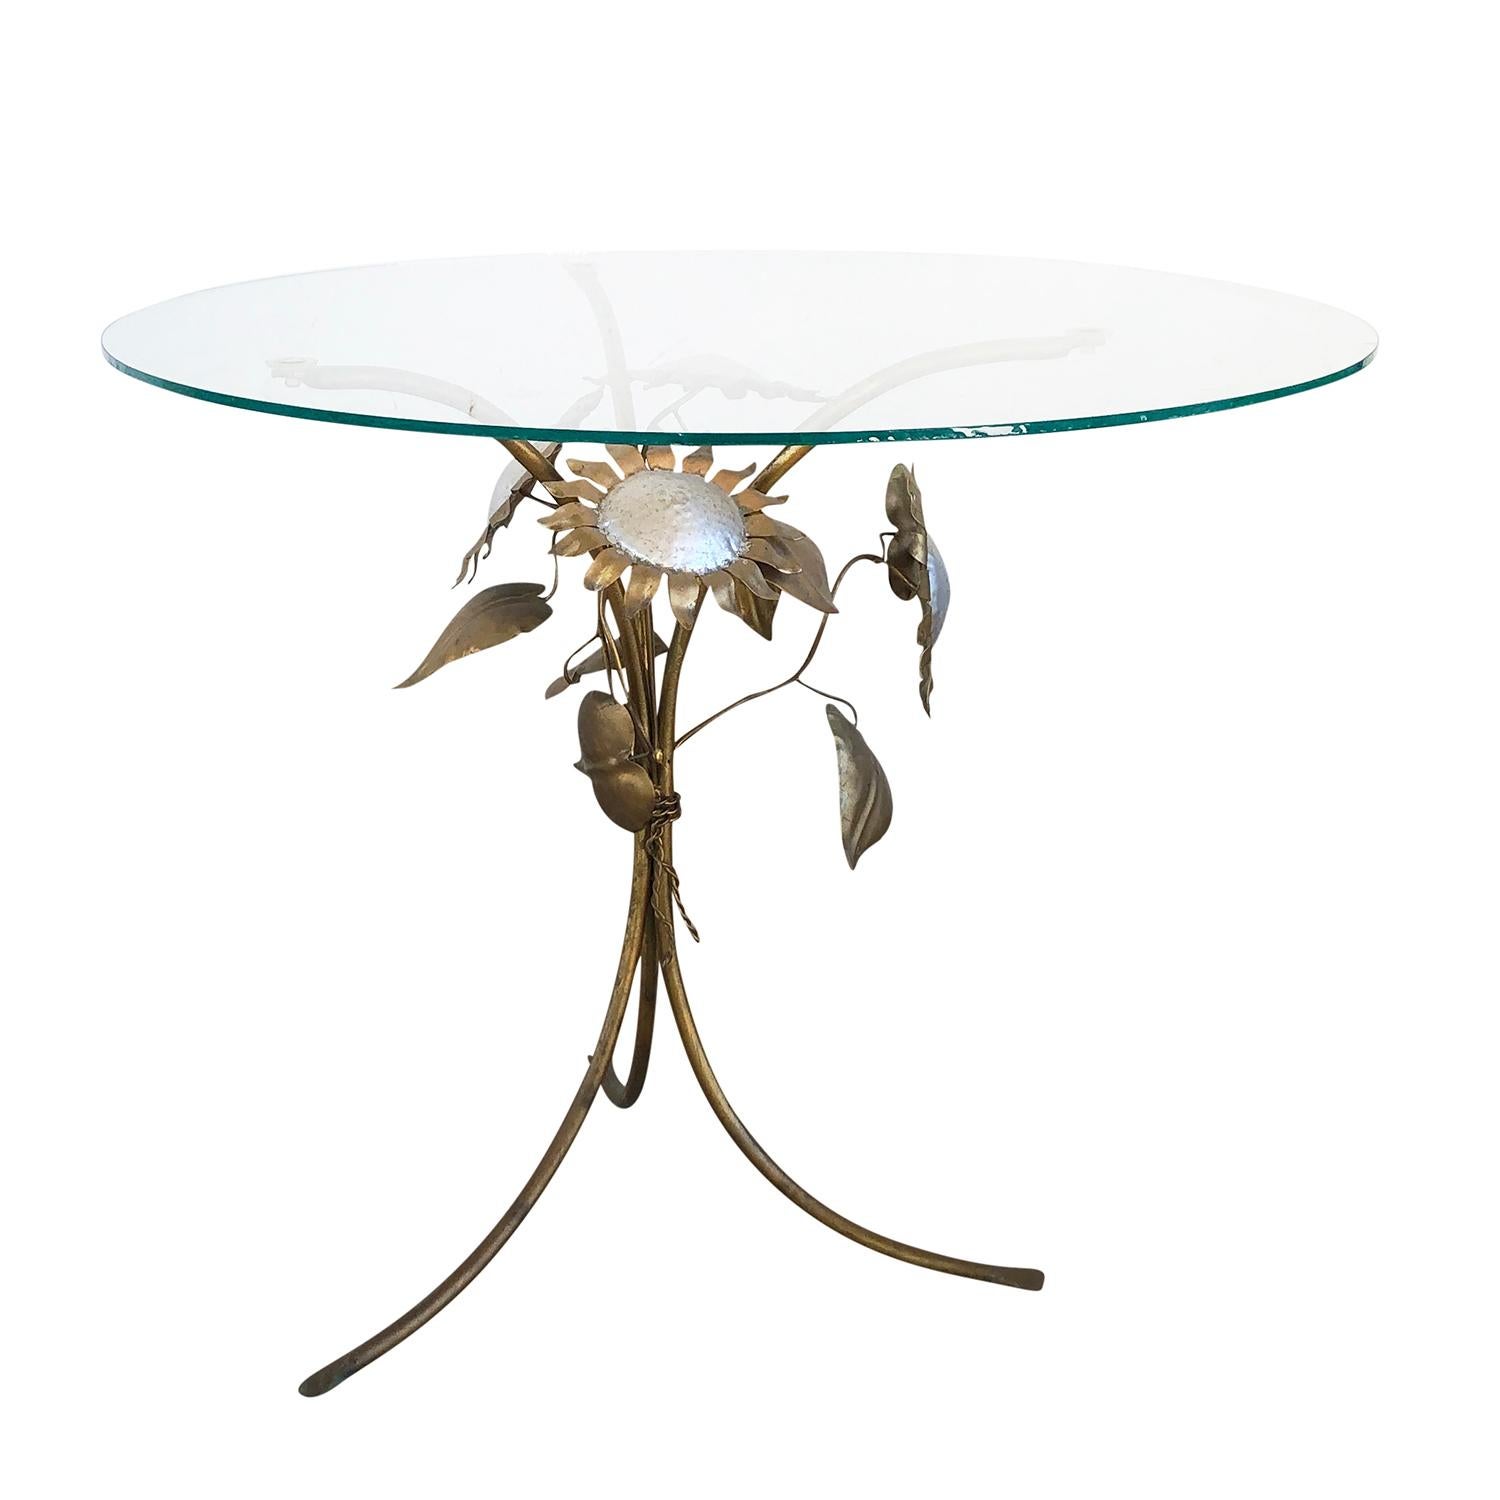 A gold, vintage Mid-Century Modern small round side, sofa table with a circular glass top and a gilded metal base on three legs and gracefully decorated with four metal sunflowers, in good condition. Wear consistent with age and use. Circa 1960,